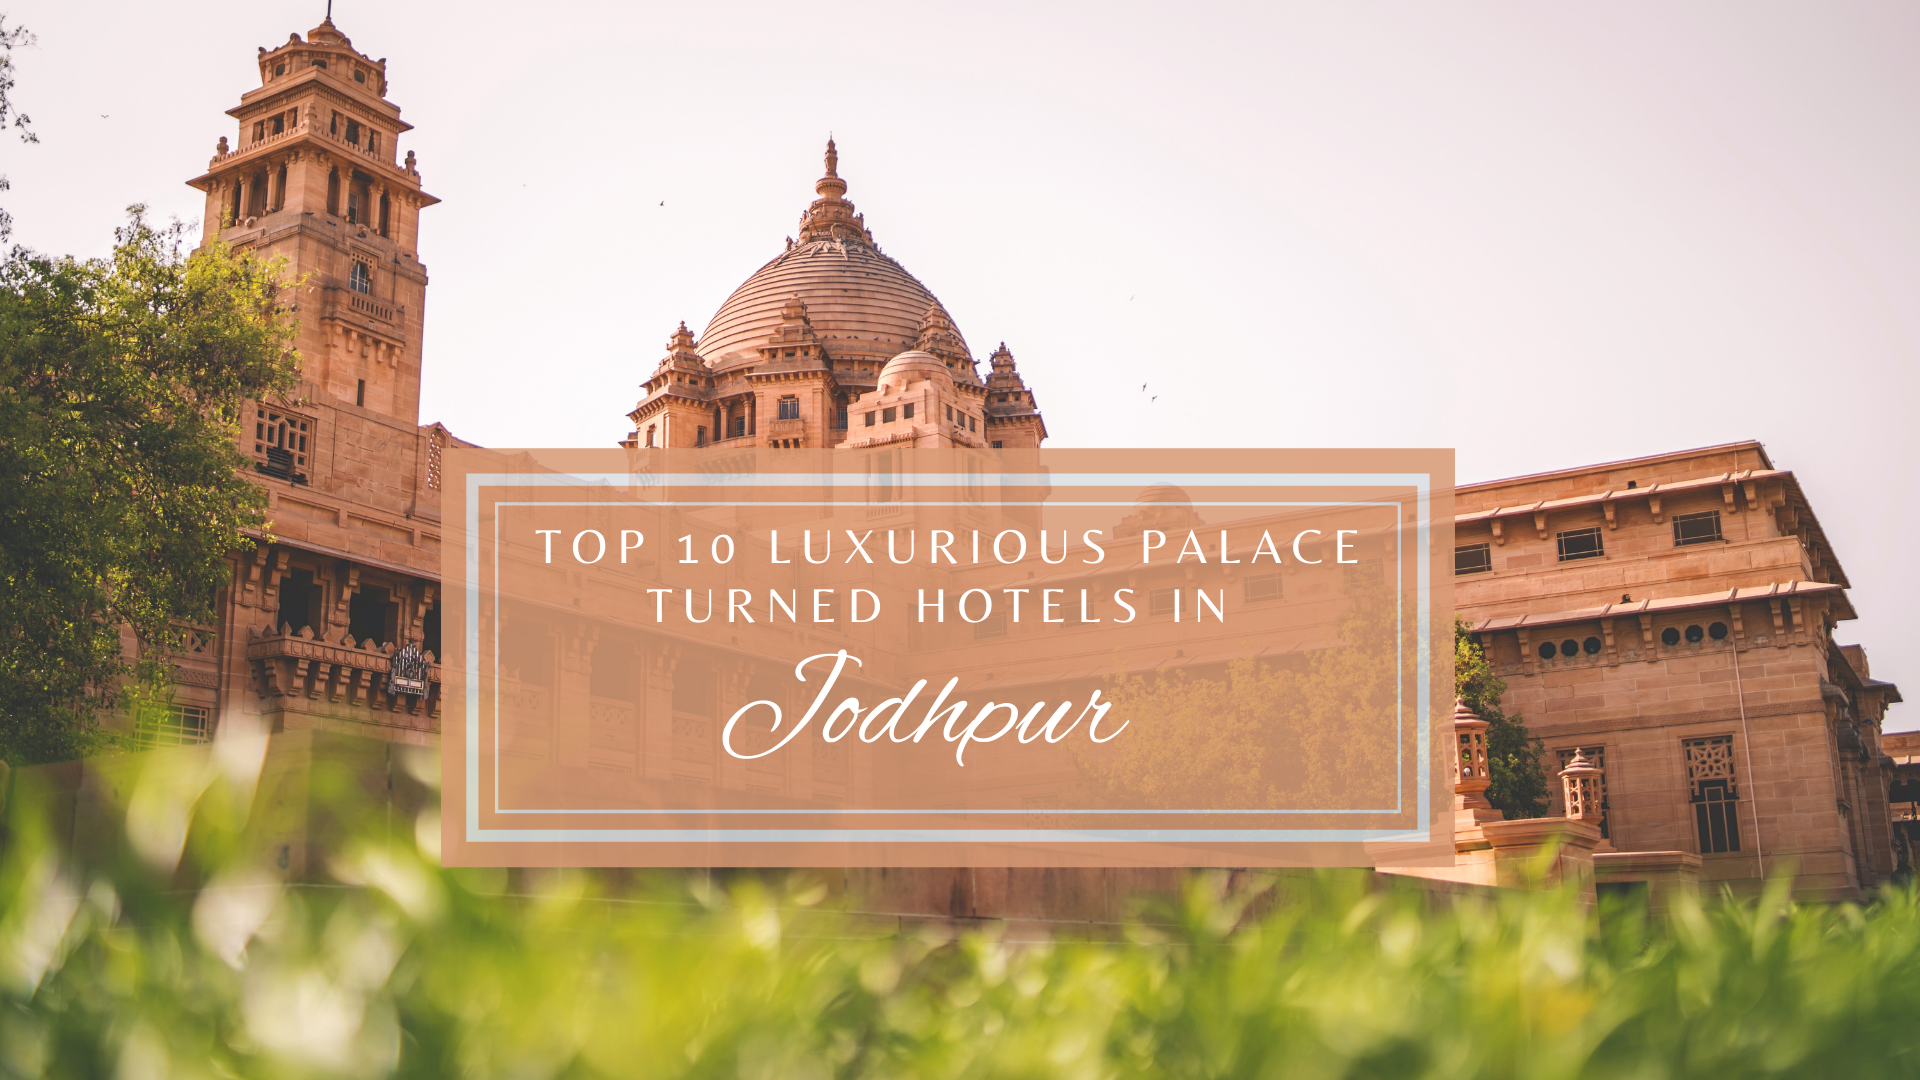 Top 10 Luxurious Palace Turned Hotels In Jodhpur